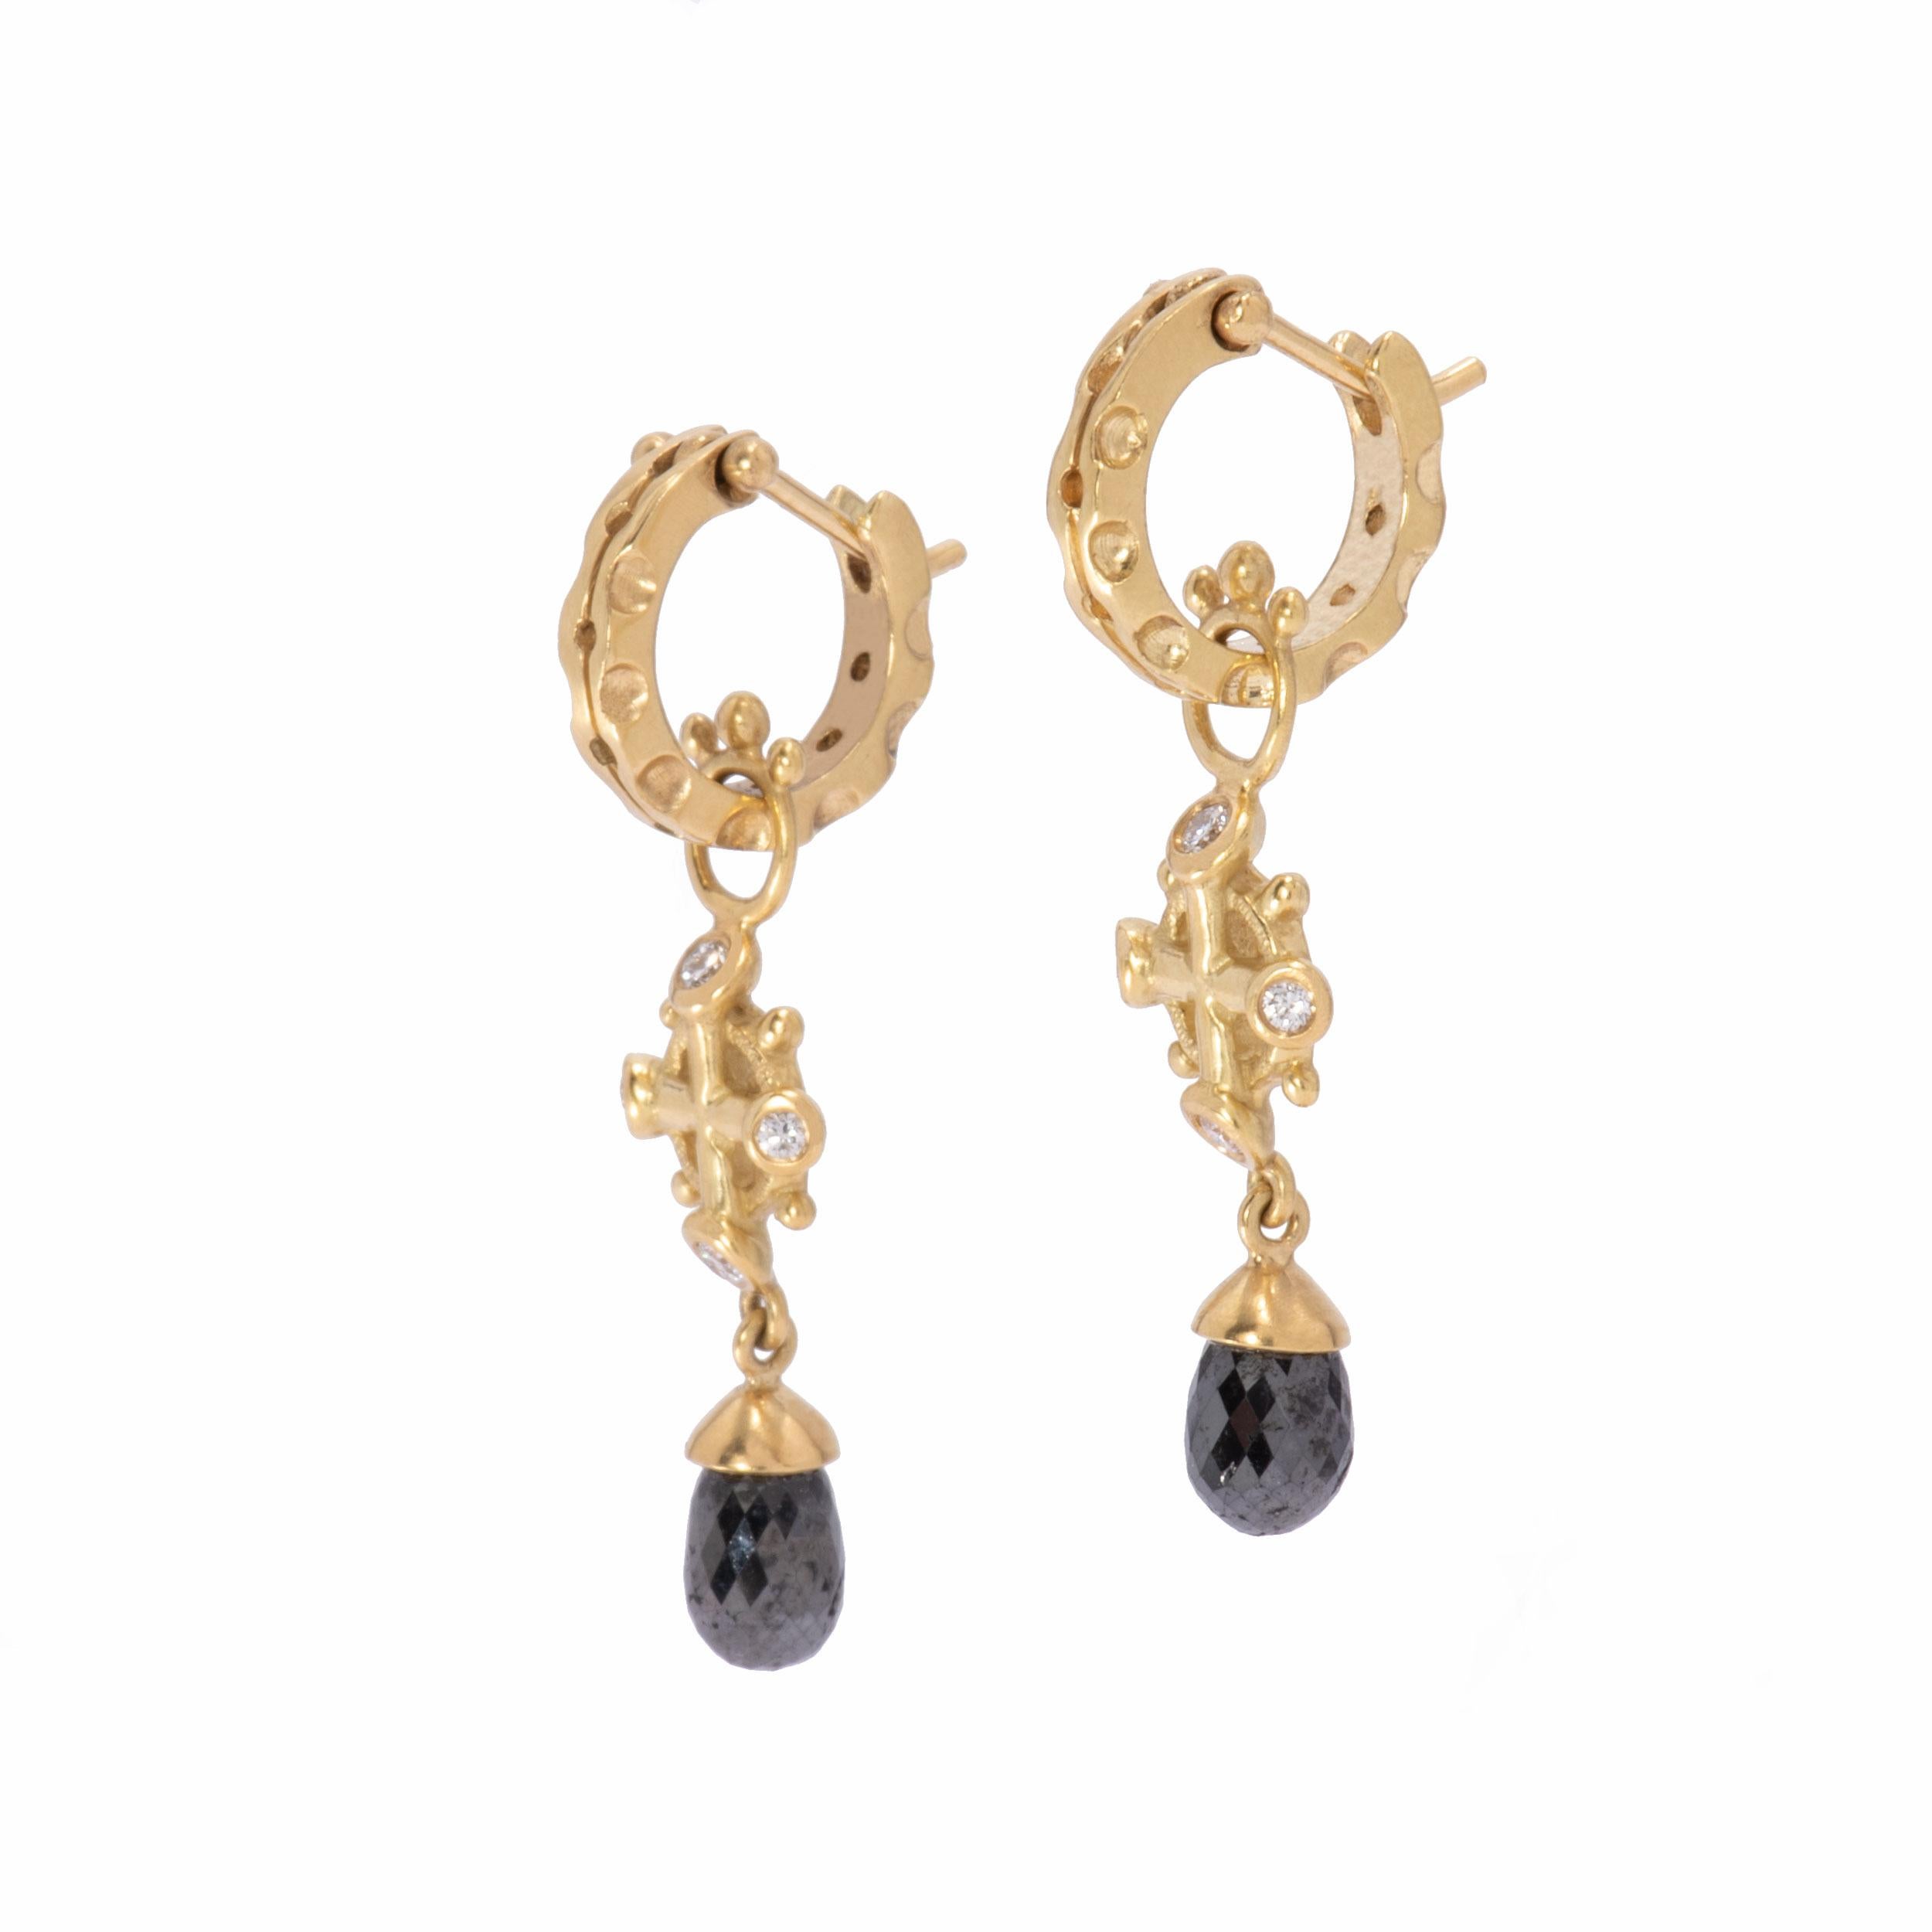 18 Karat Gold Poseidon Crown Drop Earrings are set with 4 white diamonds .20ctw at the cardinal points in the frame of a sea captain's wheel. Suspended below each Poseidon Crown are faceted black diamond briolettes 4.11ctw, more than 2 carats each.